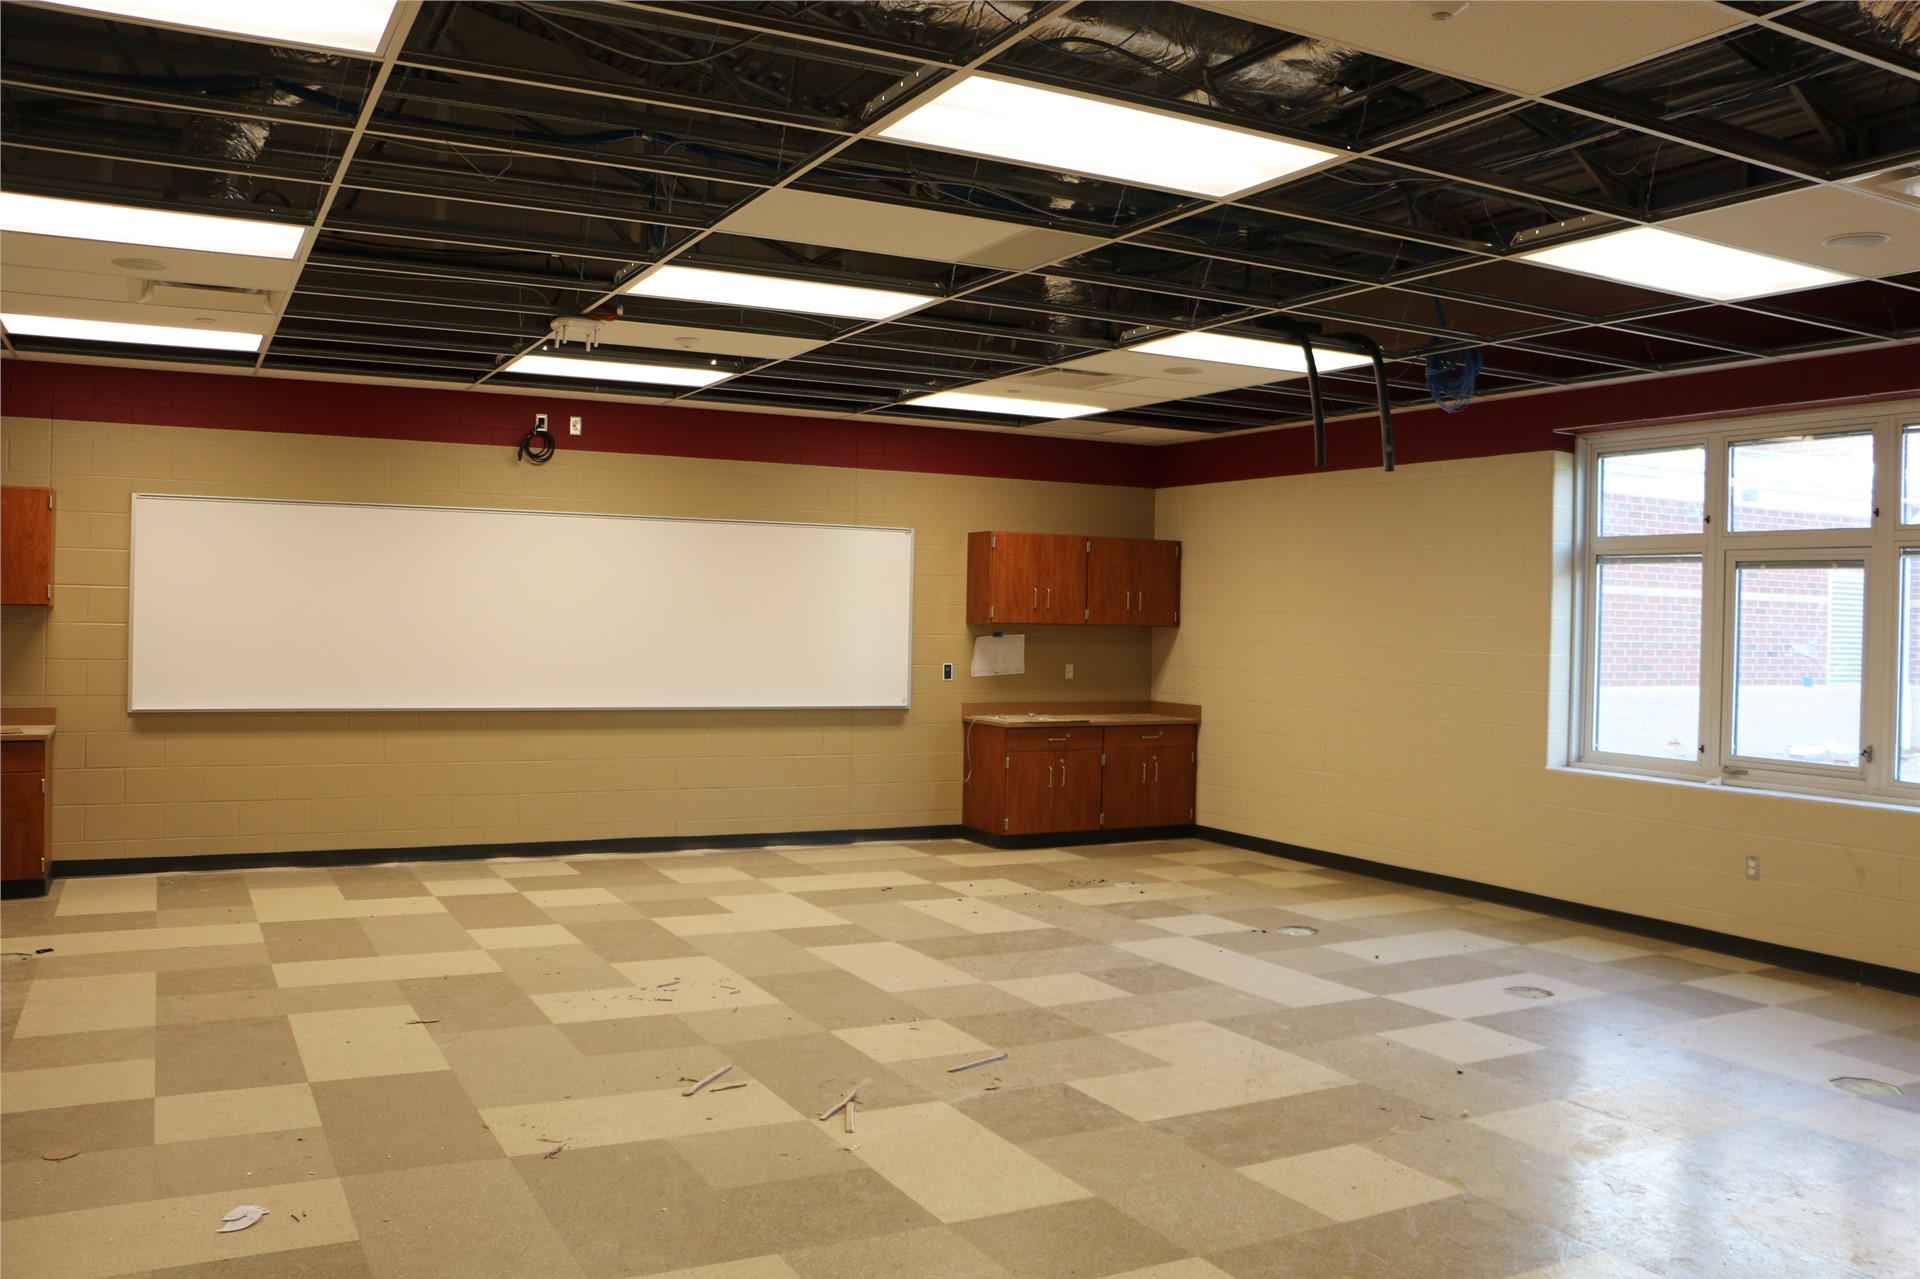 Typical Computer Instruction Classroom - Teaching/Front Wall